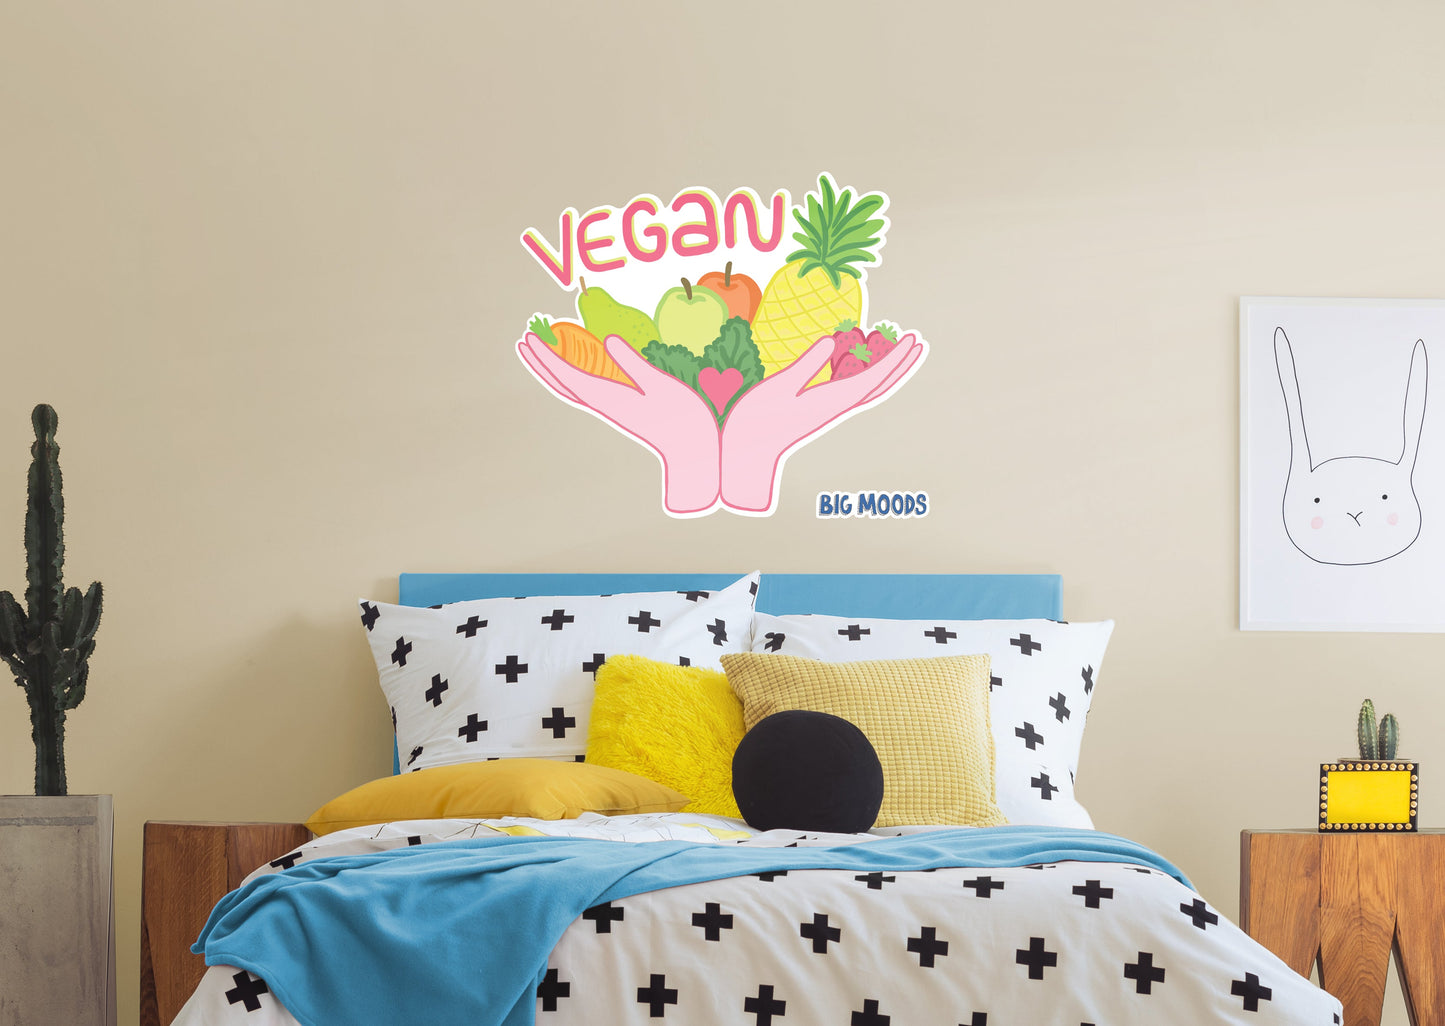 Vegan Fruits & Veggies Hands        - Officially Licensed Big Moods Removable     Adhesive Decal